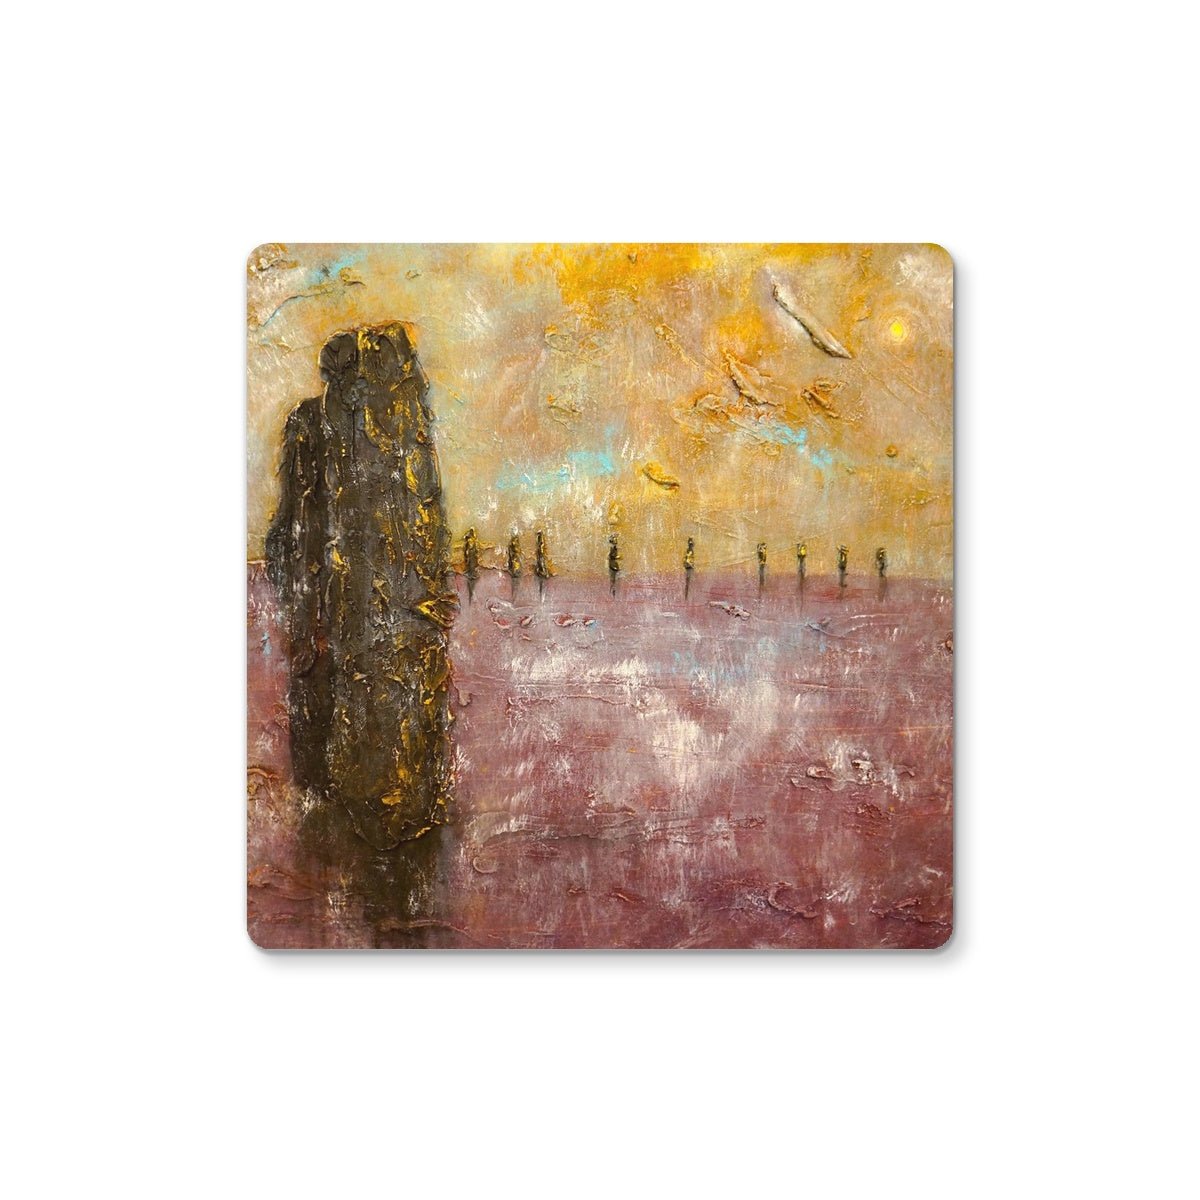 Bordgar Mist Orkney Art Gifts Coaster-Coasters-Orkney Art Gallery-4 Coasters-Paintings, Prints, Homeware, Art Gifts From Scotland By Scottish Artist Kevin Hunter